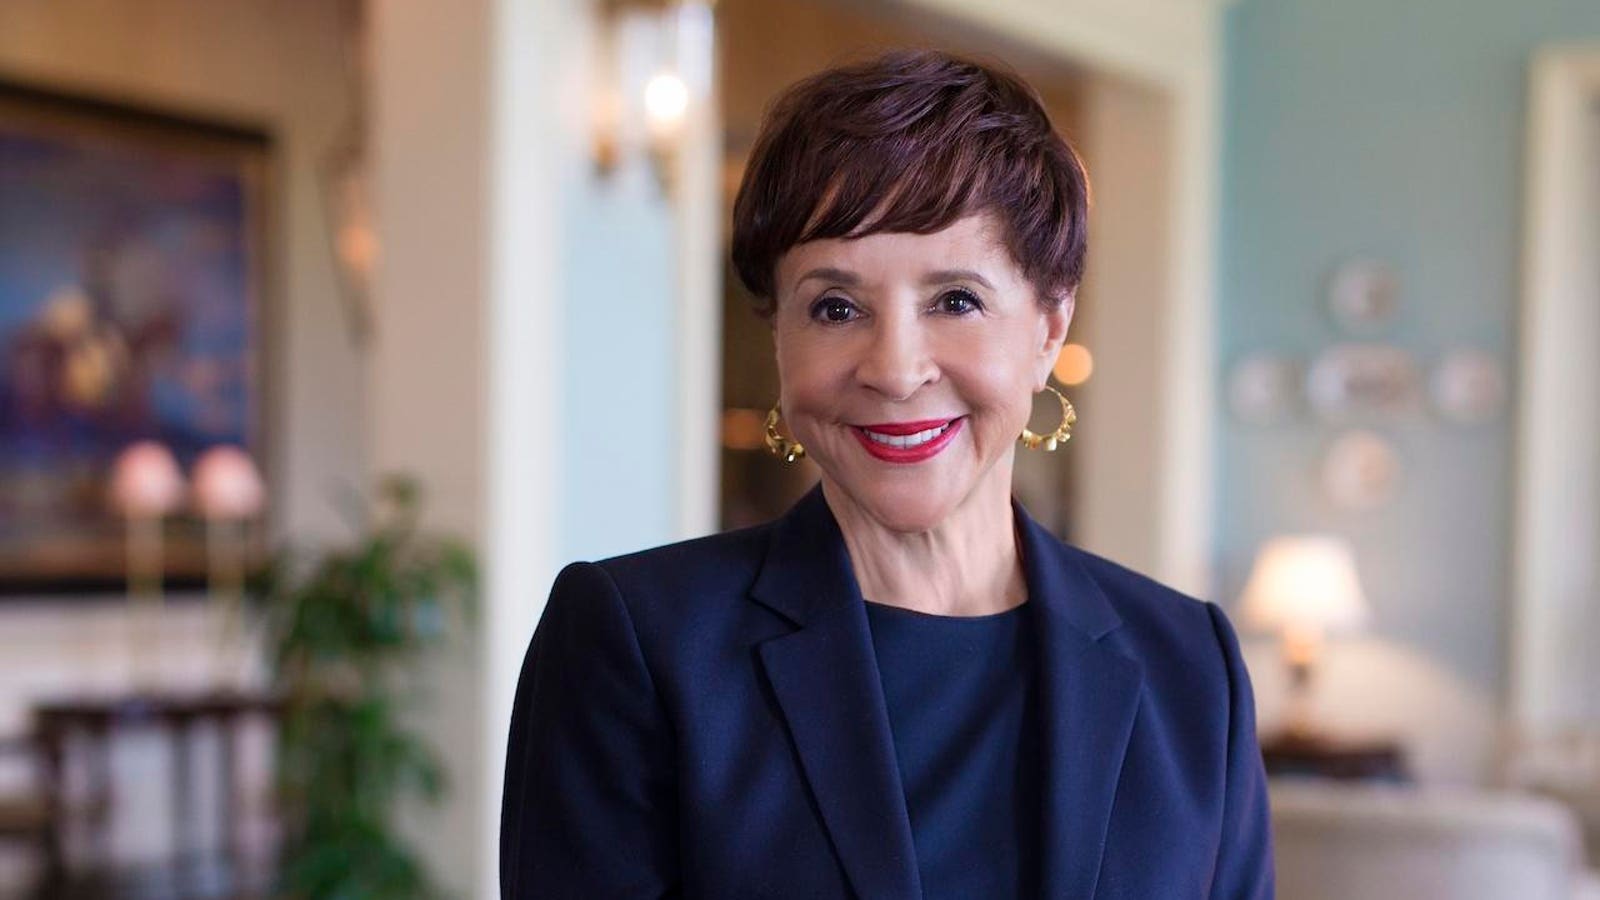 sheila-johnson,-founder-and-ceo-of-salamander-hotels-took-a-“walk-through-fire”-on-her-journey-to-triumph.